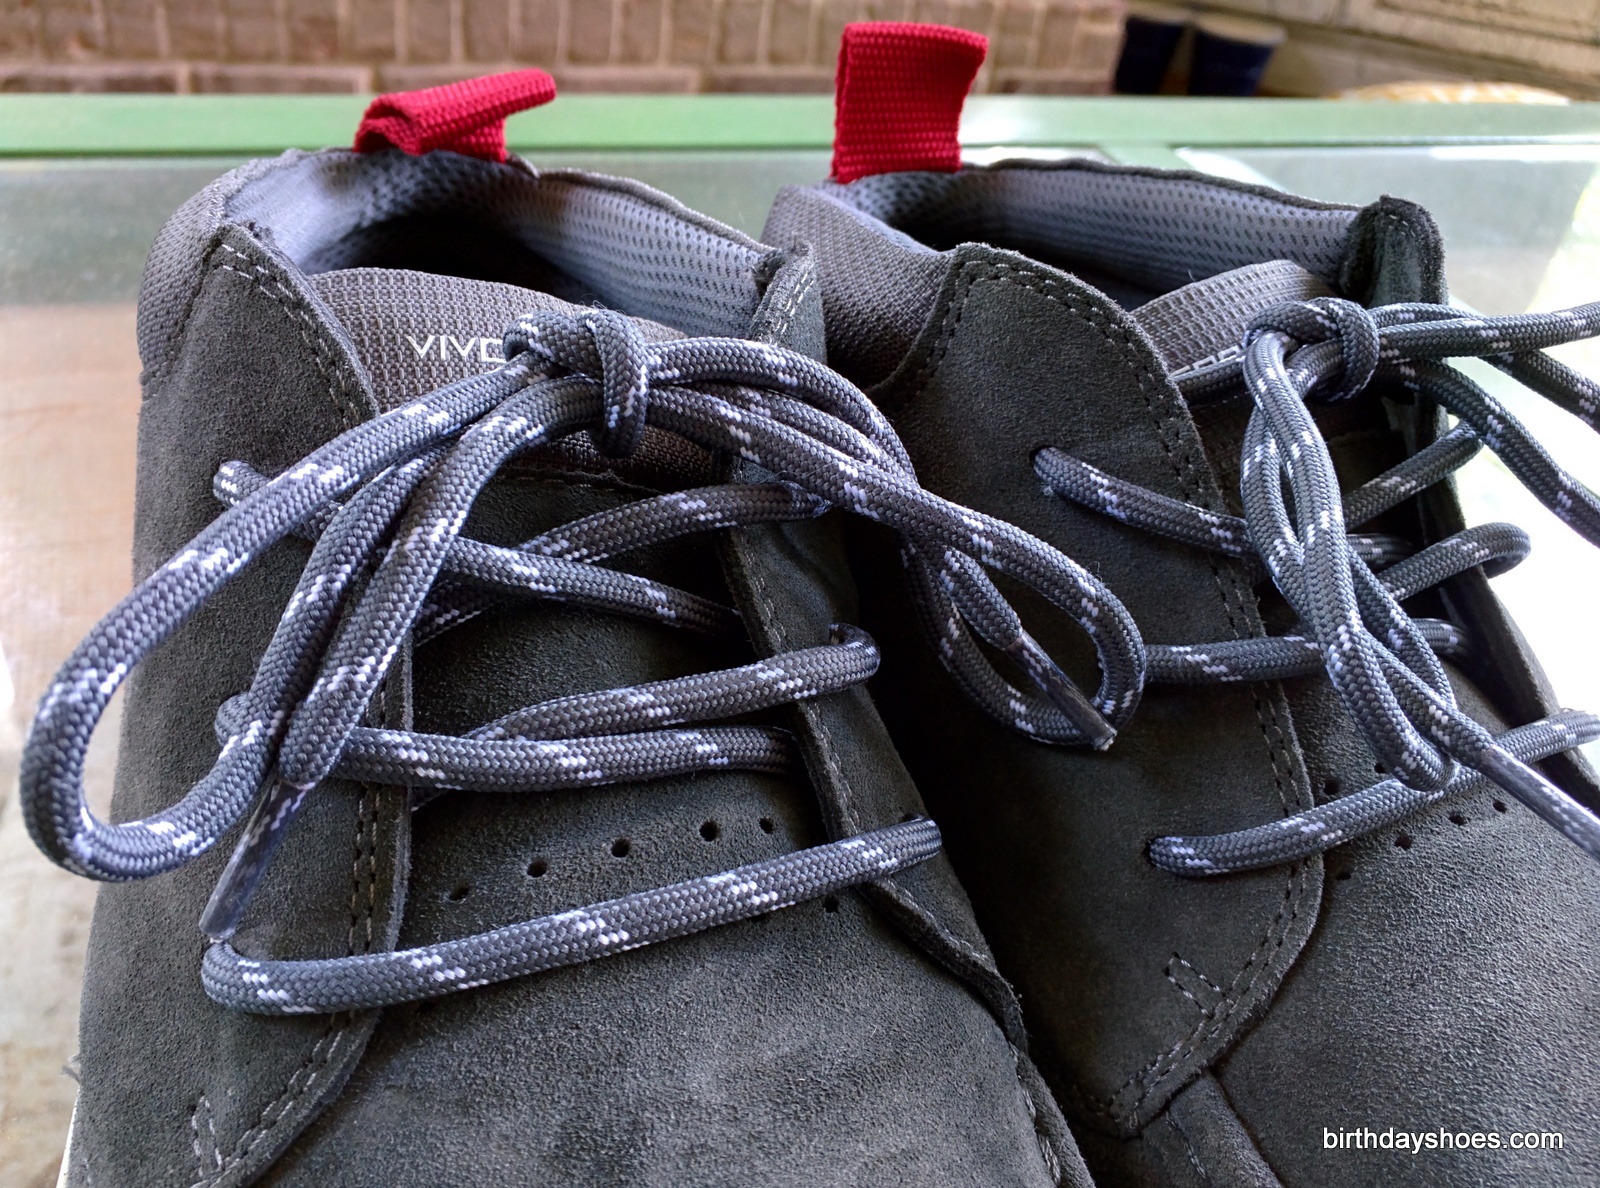 Vivo Barefoot Drake Review – Birthday Shoes – Toe Shoes, Barefoot or ...